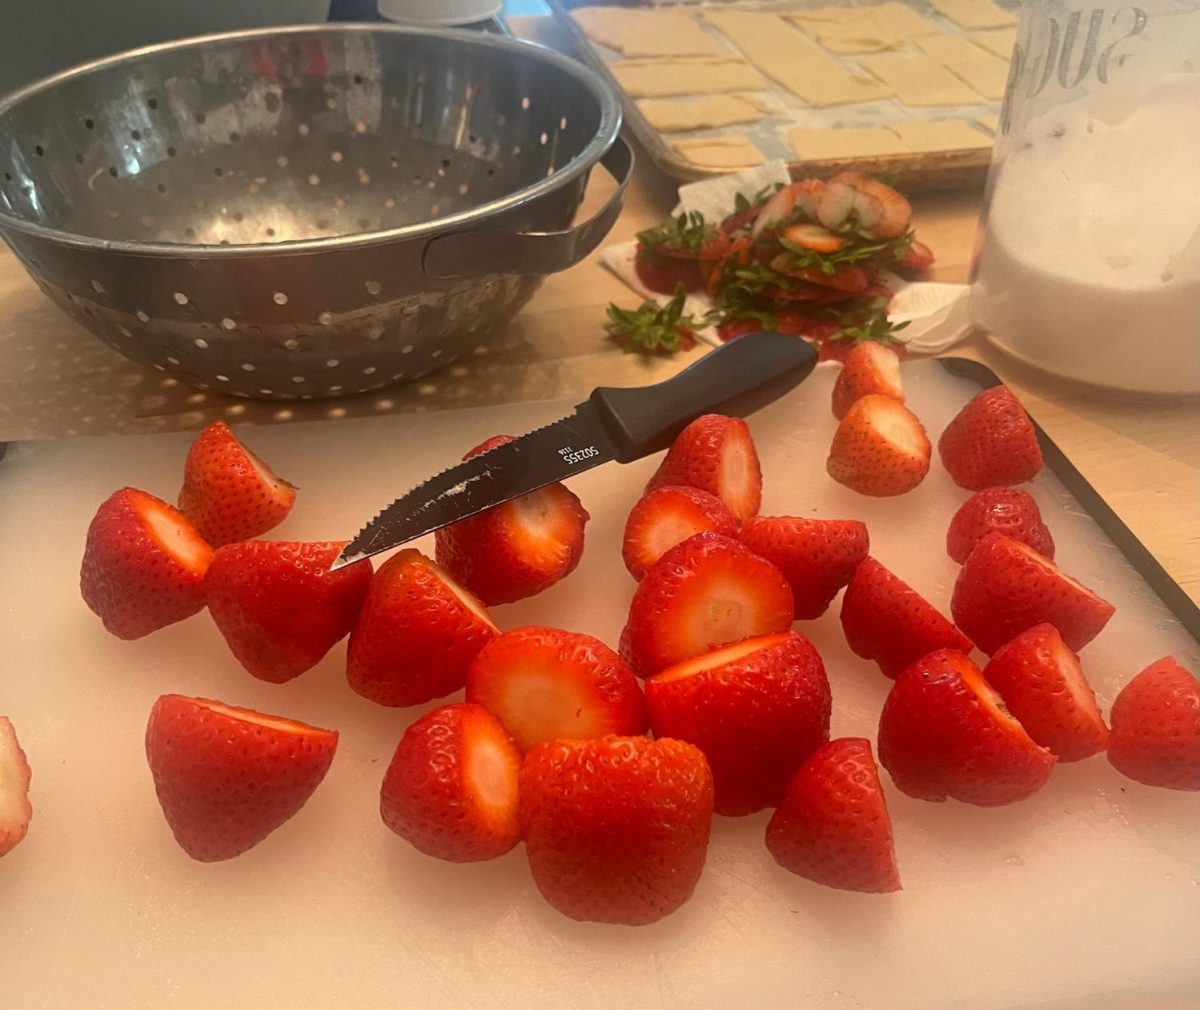 Step 2: Cut Strawberries, dice if wanted